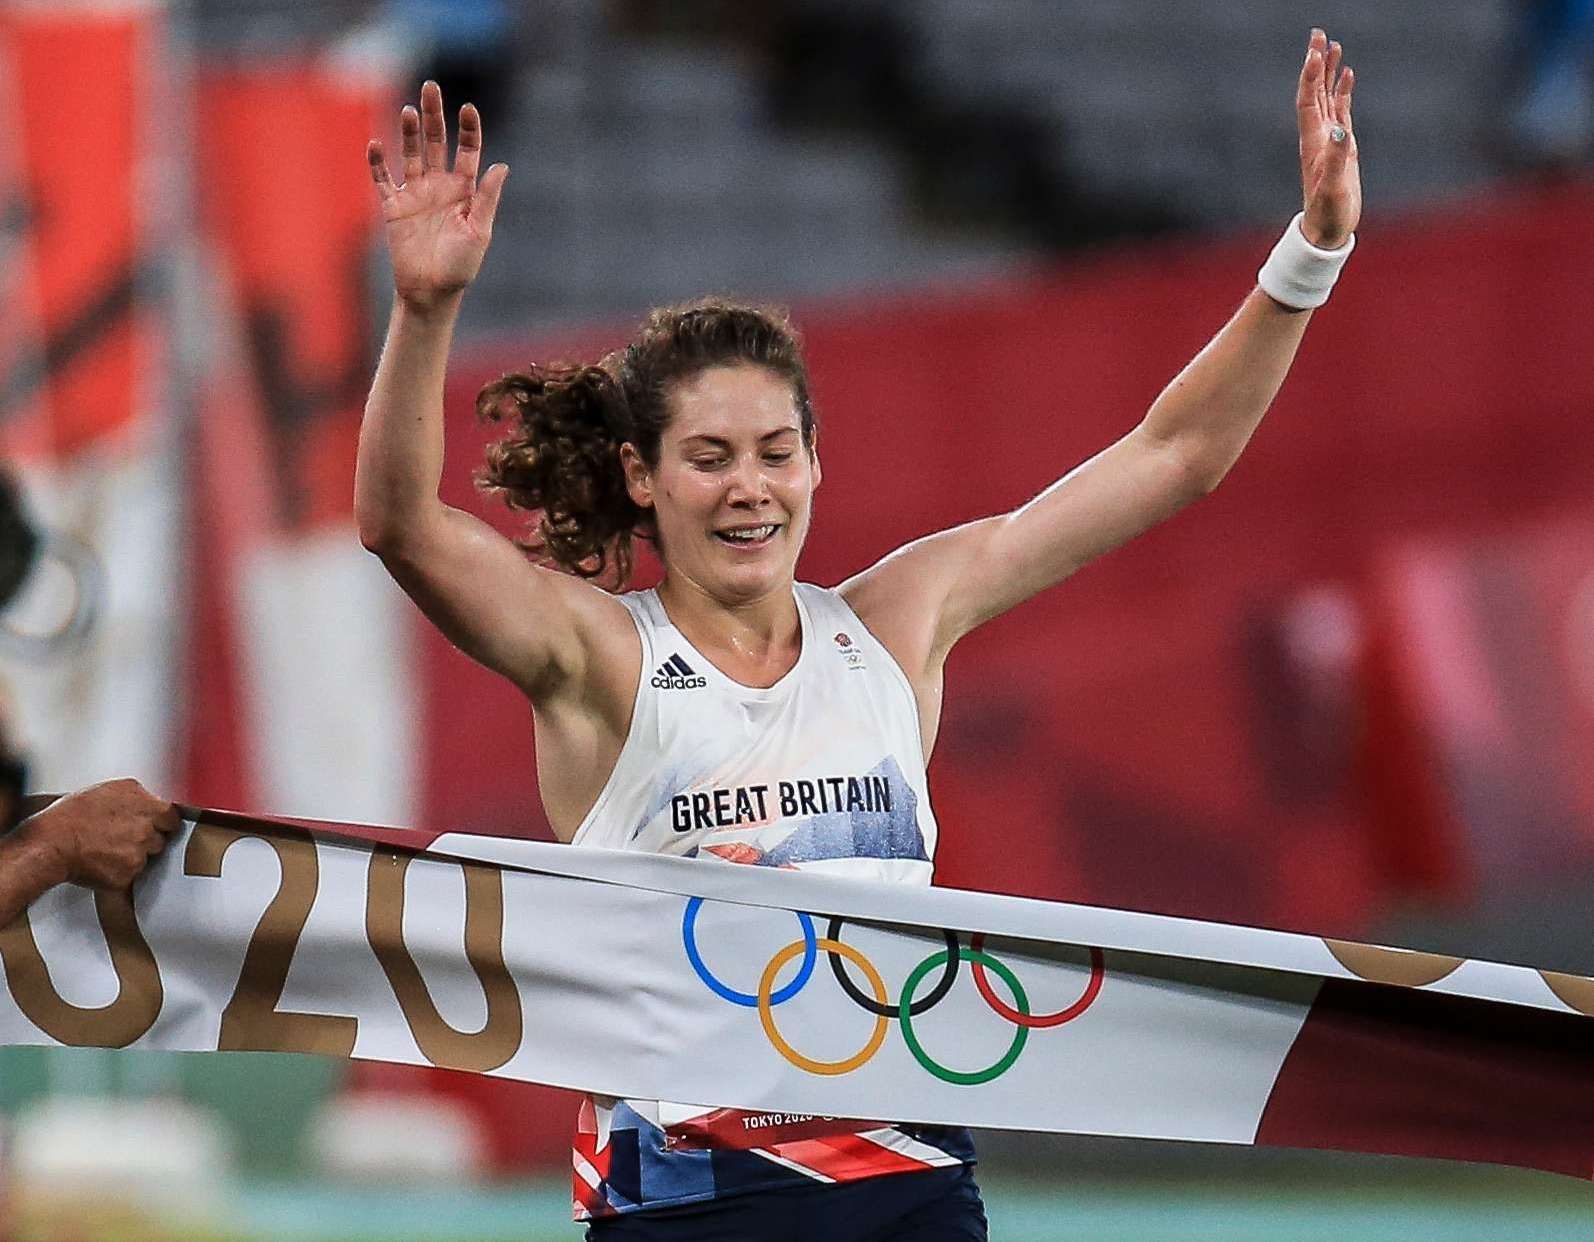 Meopham's Kate French crosses the line to win gold on Friday. Picture: UPIM Media (49974477)